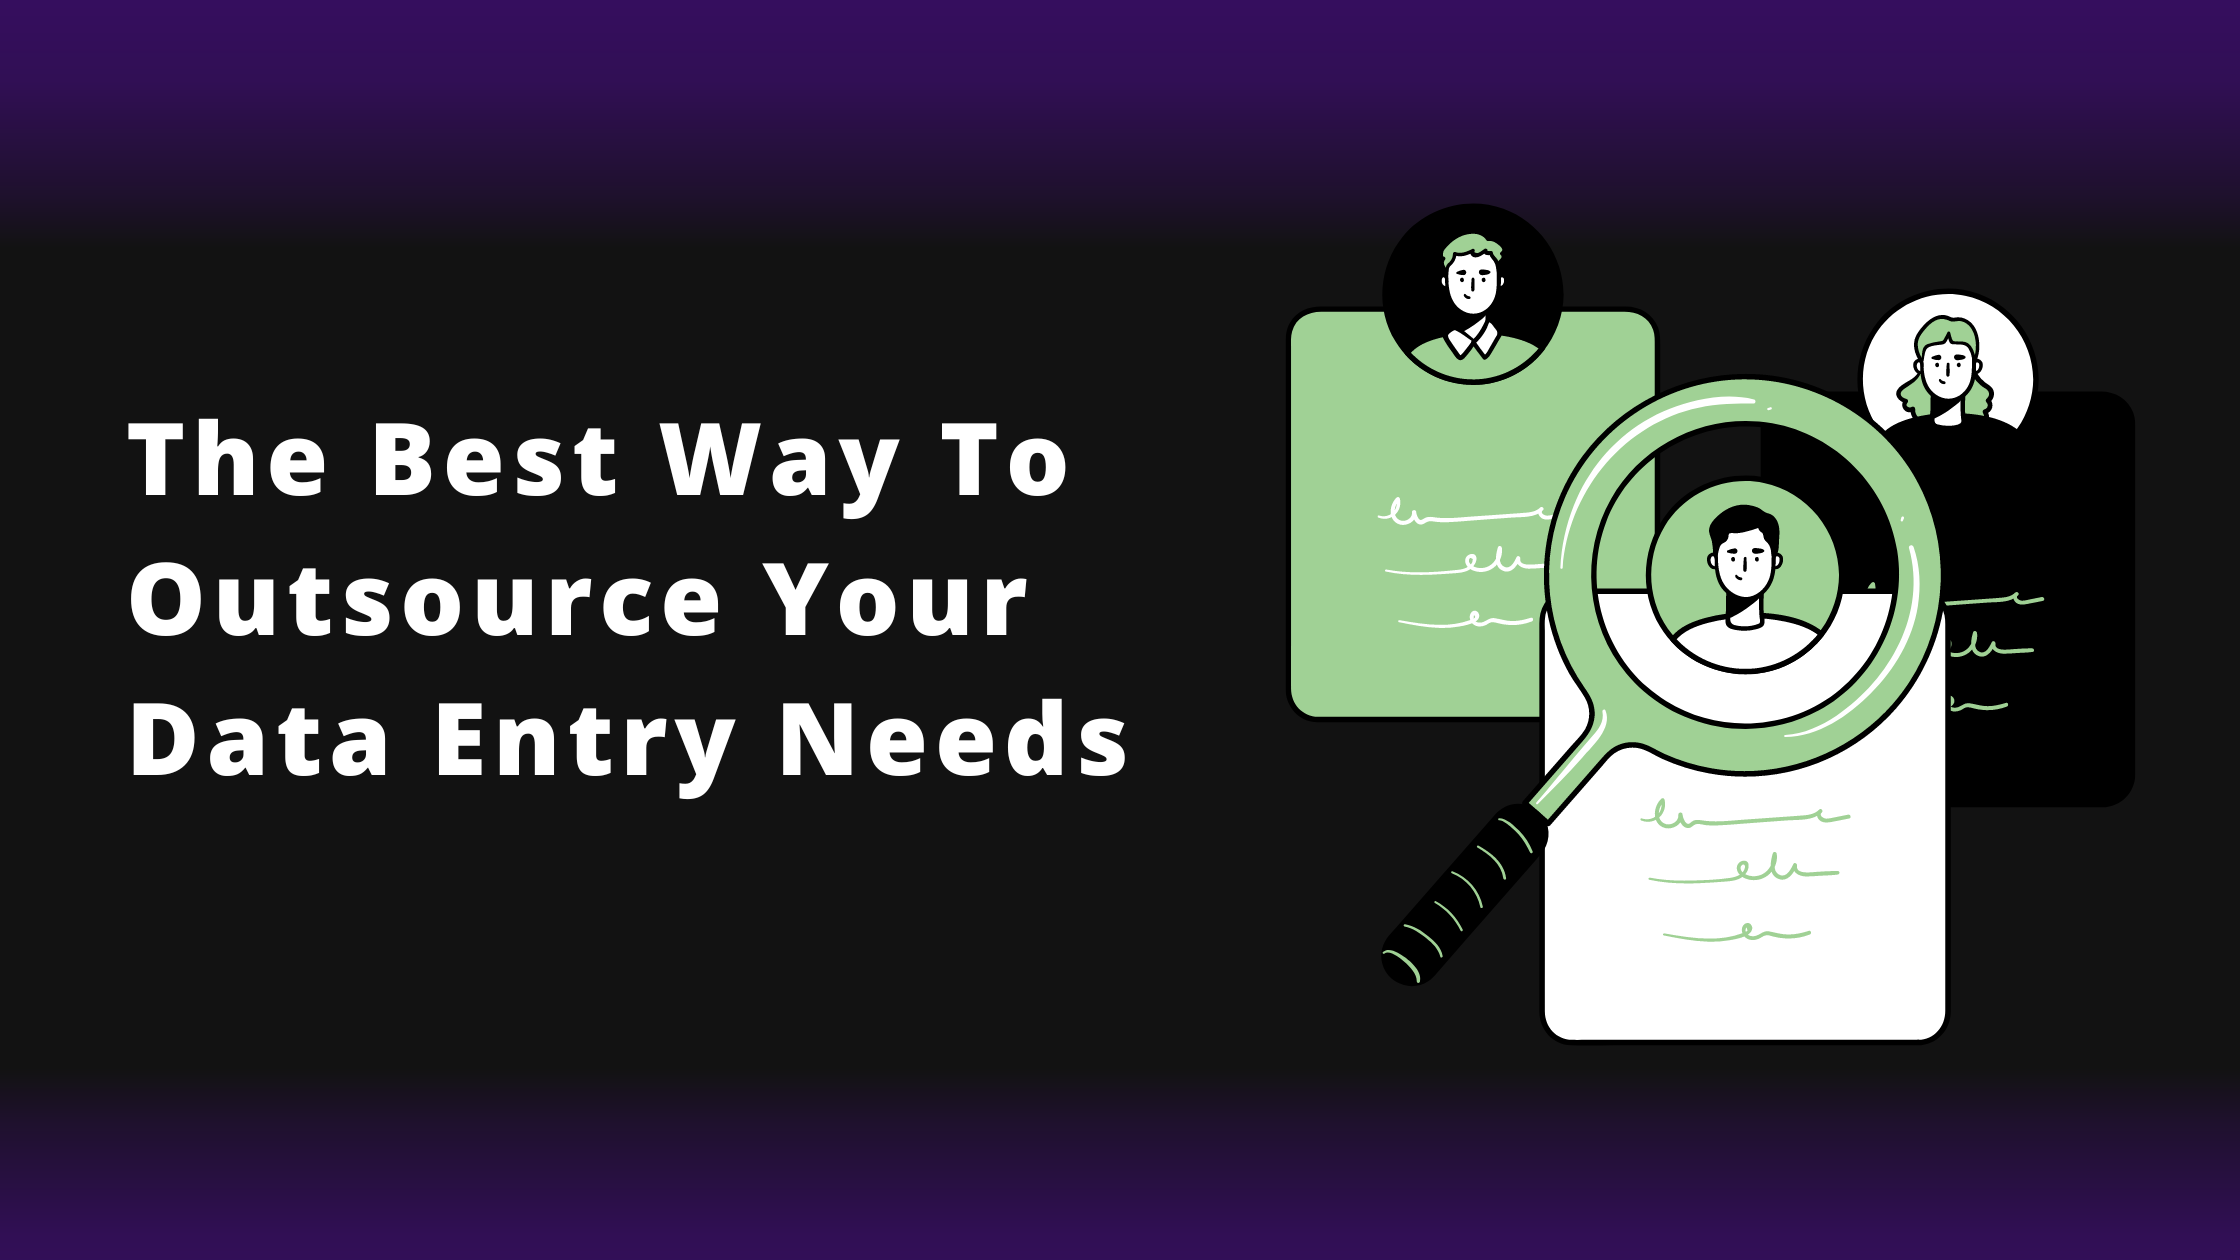 The best way to outsource your data entry needs